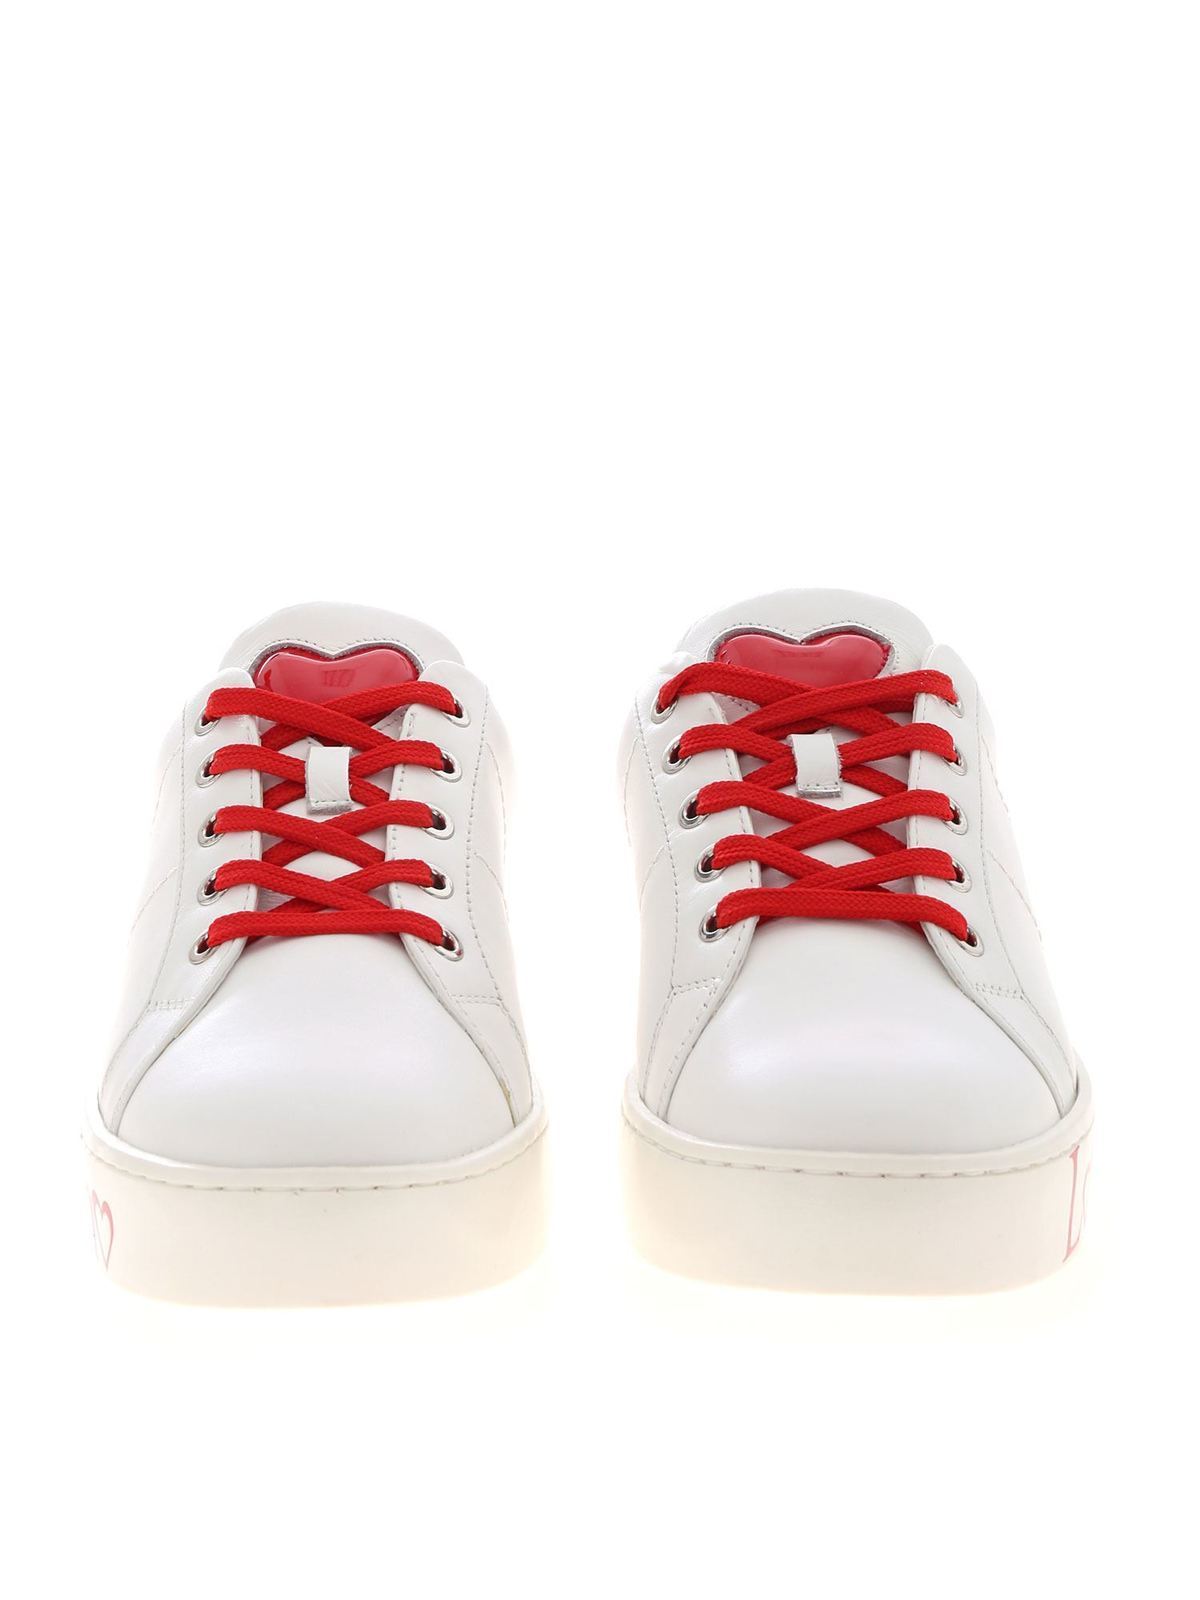 Love Moschino - Sneakers bianche e rosse con stampa logo - sneakers -  JA15033G1AIF110C